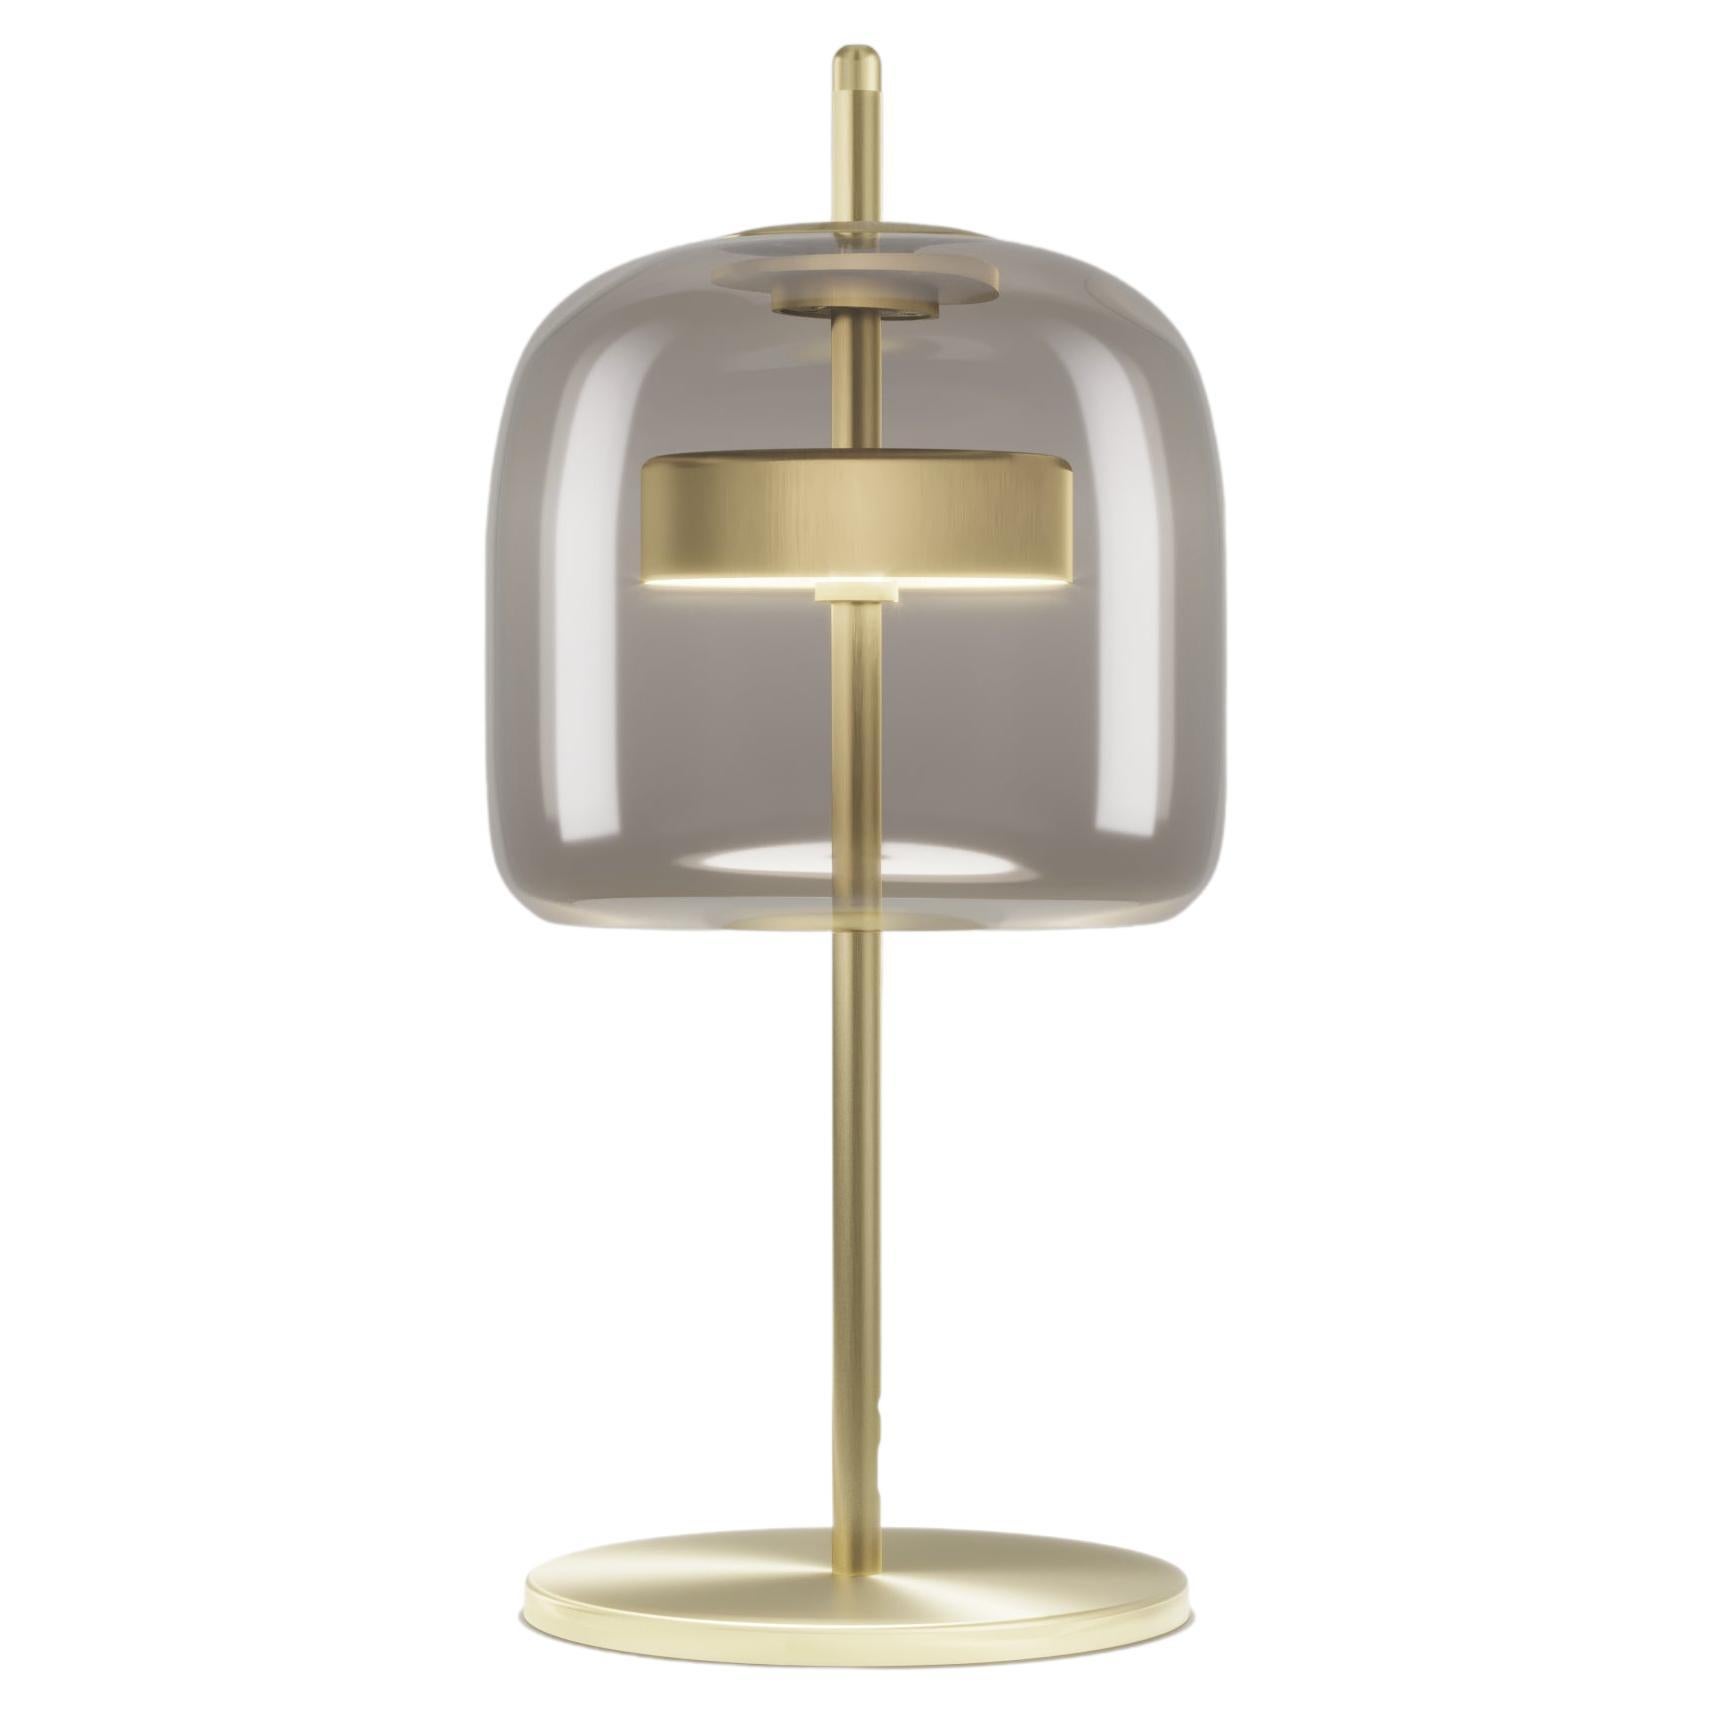 Vistosi Jube Table Lamp in Smoky Transparent Glass And Matt Gold Finish For Sale